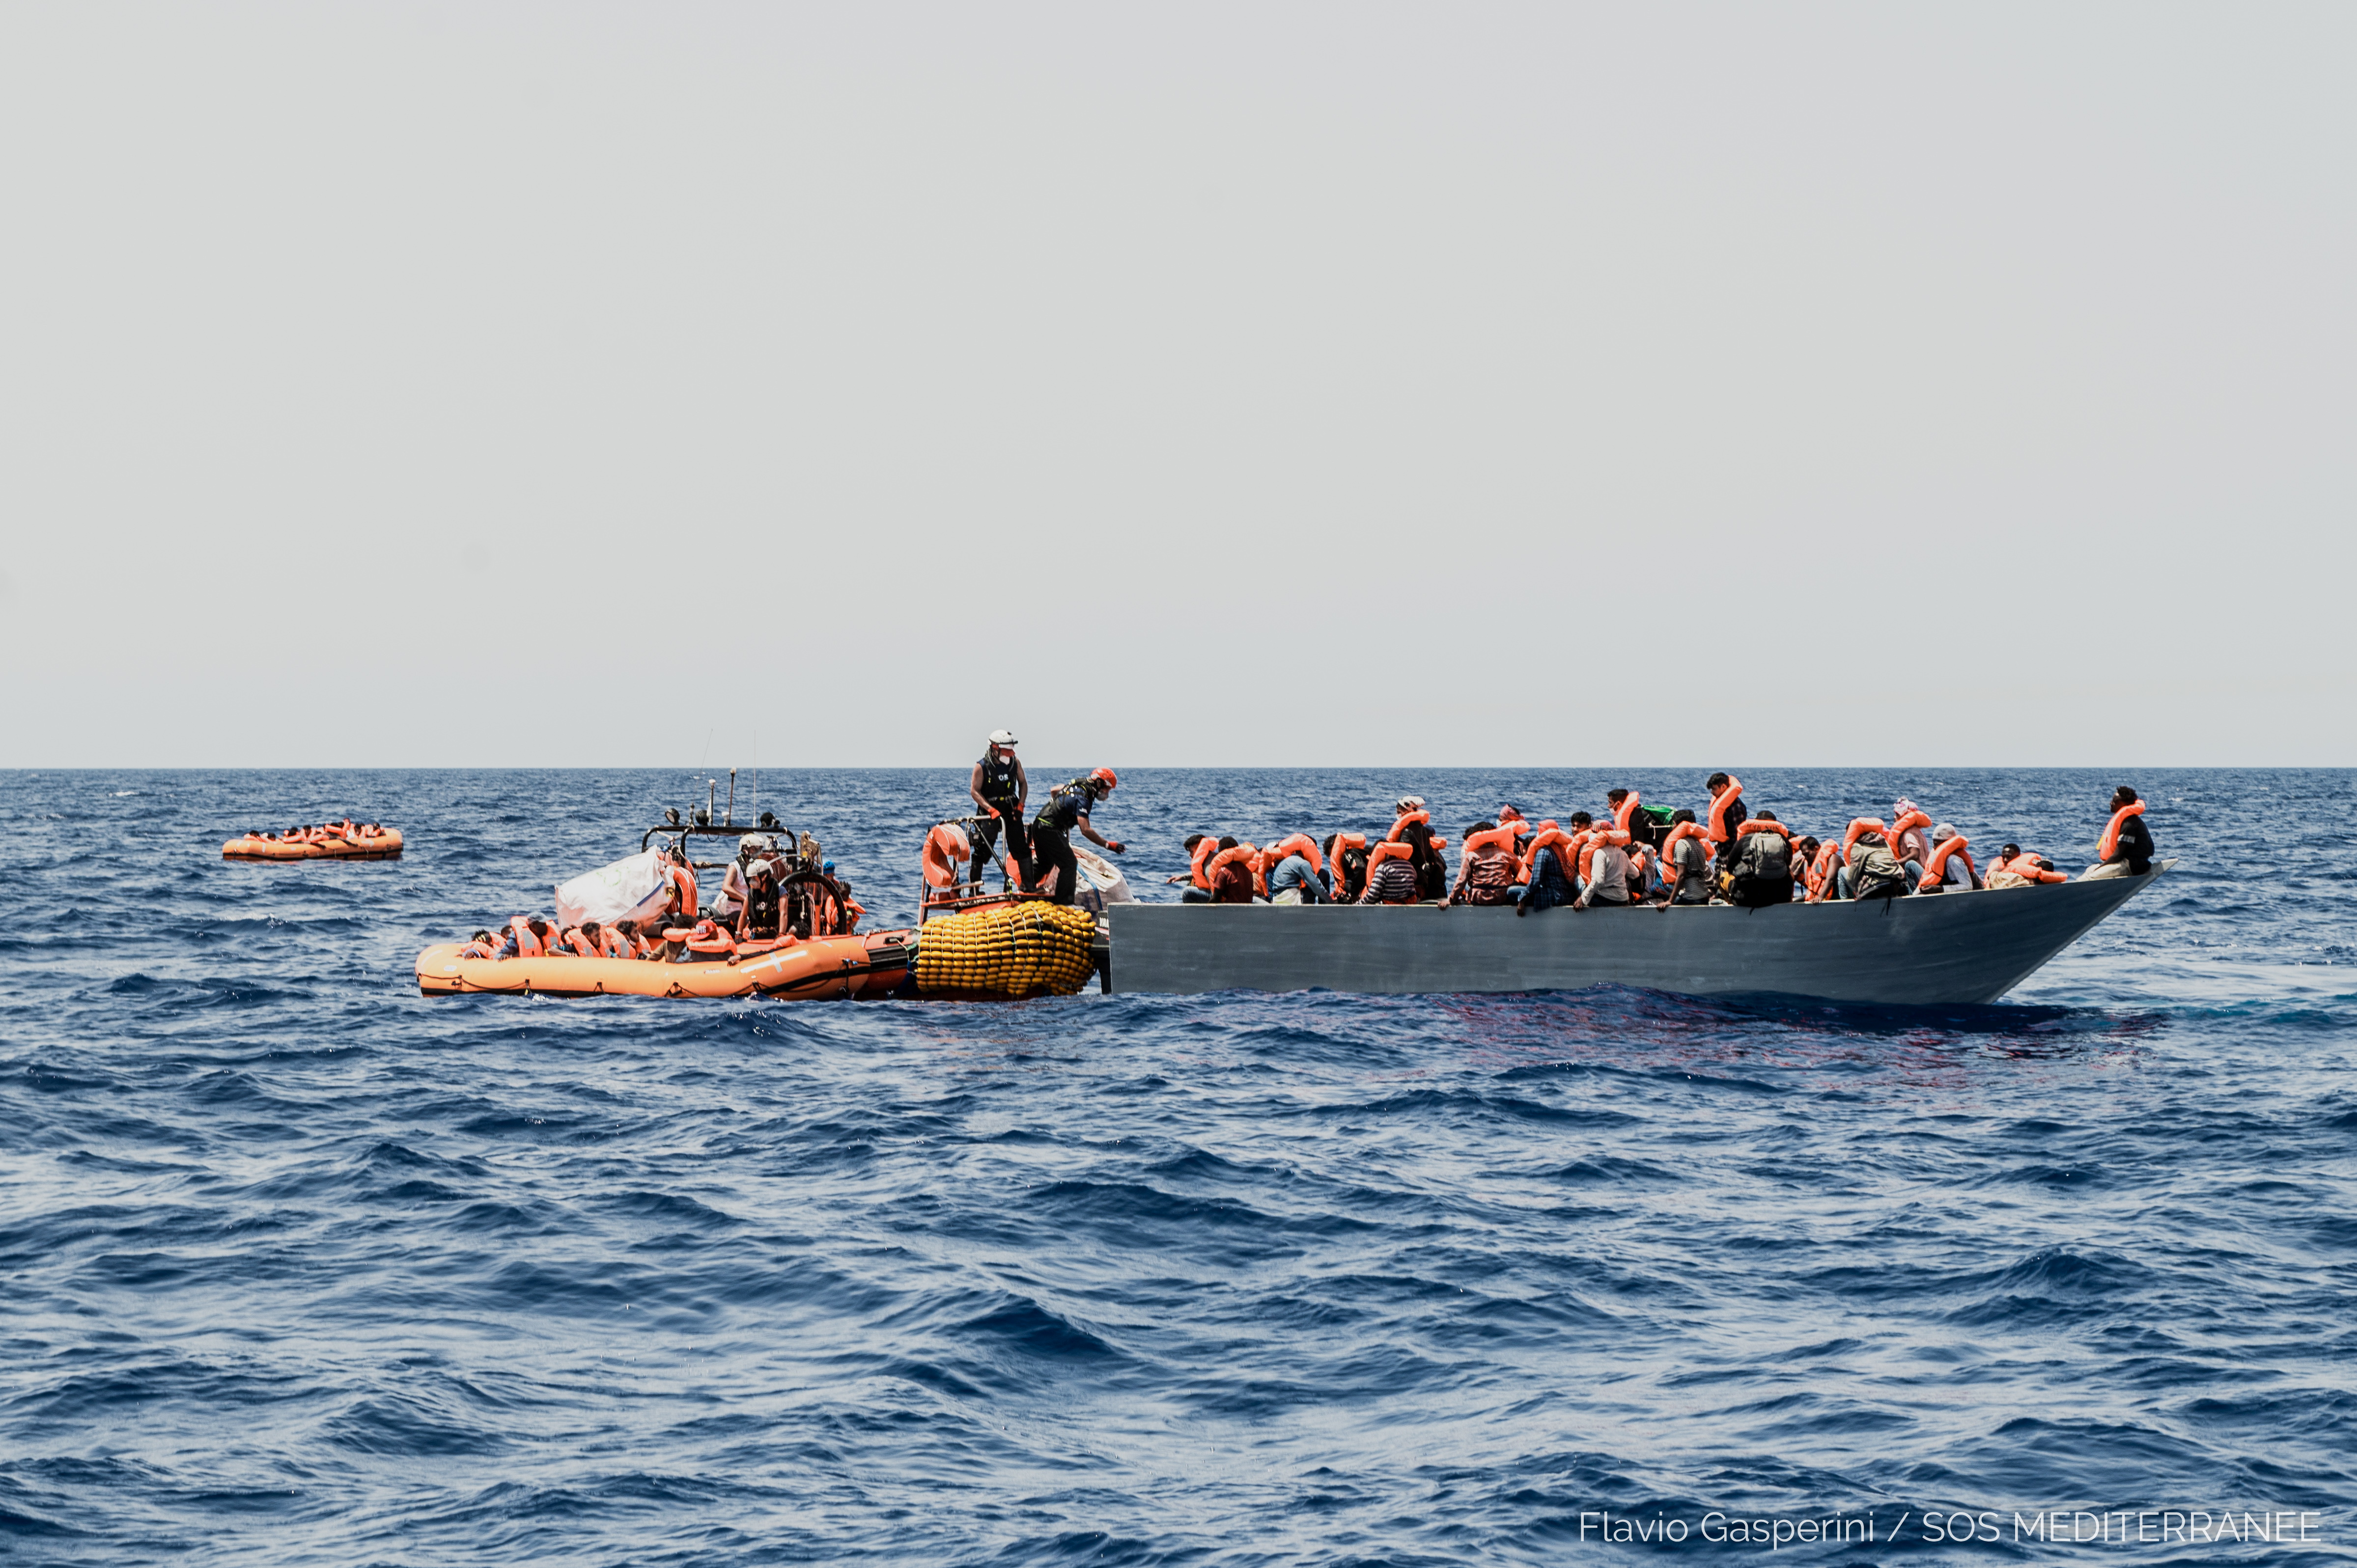 Migrants are rescued during a search and rescue (SAR) operation in the Mediterranean Sea, July 4, 2021. Picture taken July 4, 2021. Flavio Gasperini/SOS Mediterranee/Handout via REUTERS ATTENTION EDITORS - THIS IMAGE HAS BEEN SUPPLIED BY A THIRD PARTY. NO RESALES. NO ARCHIVES. MANDATORY CREDIT